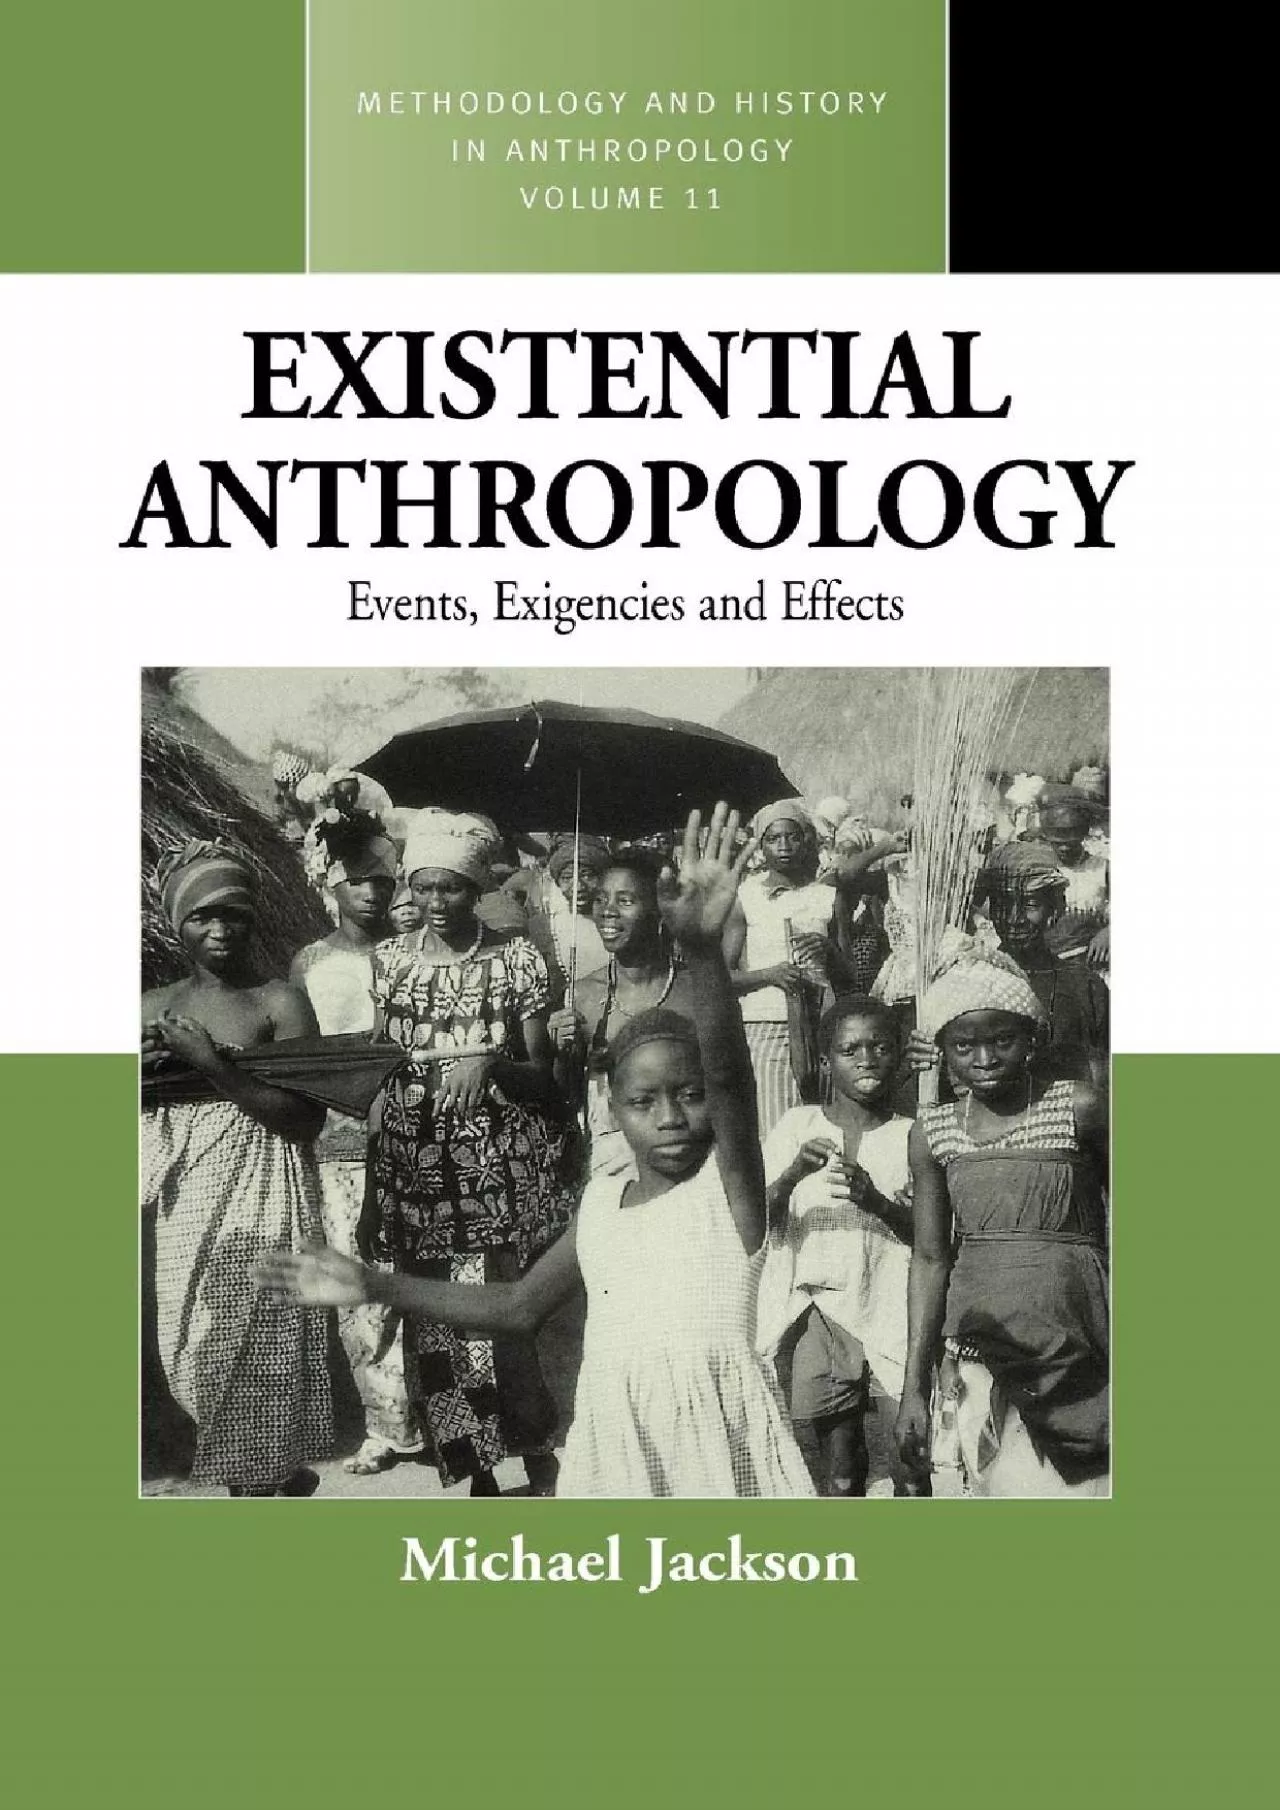 (READ)-Existential Anthropology: Events, Exigencies, and Effects (Methodology & History